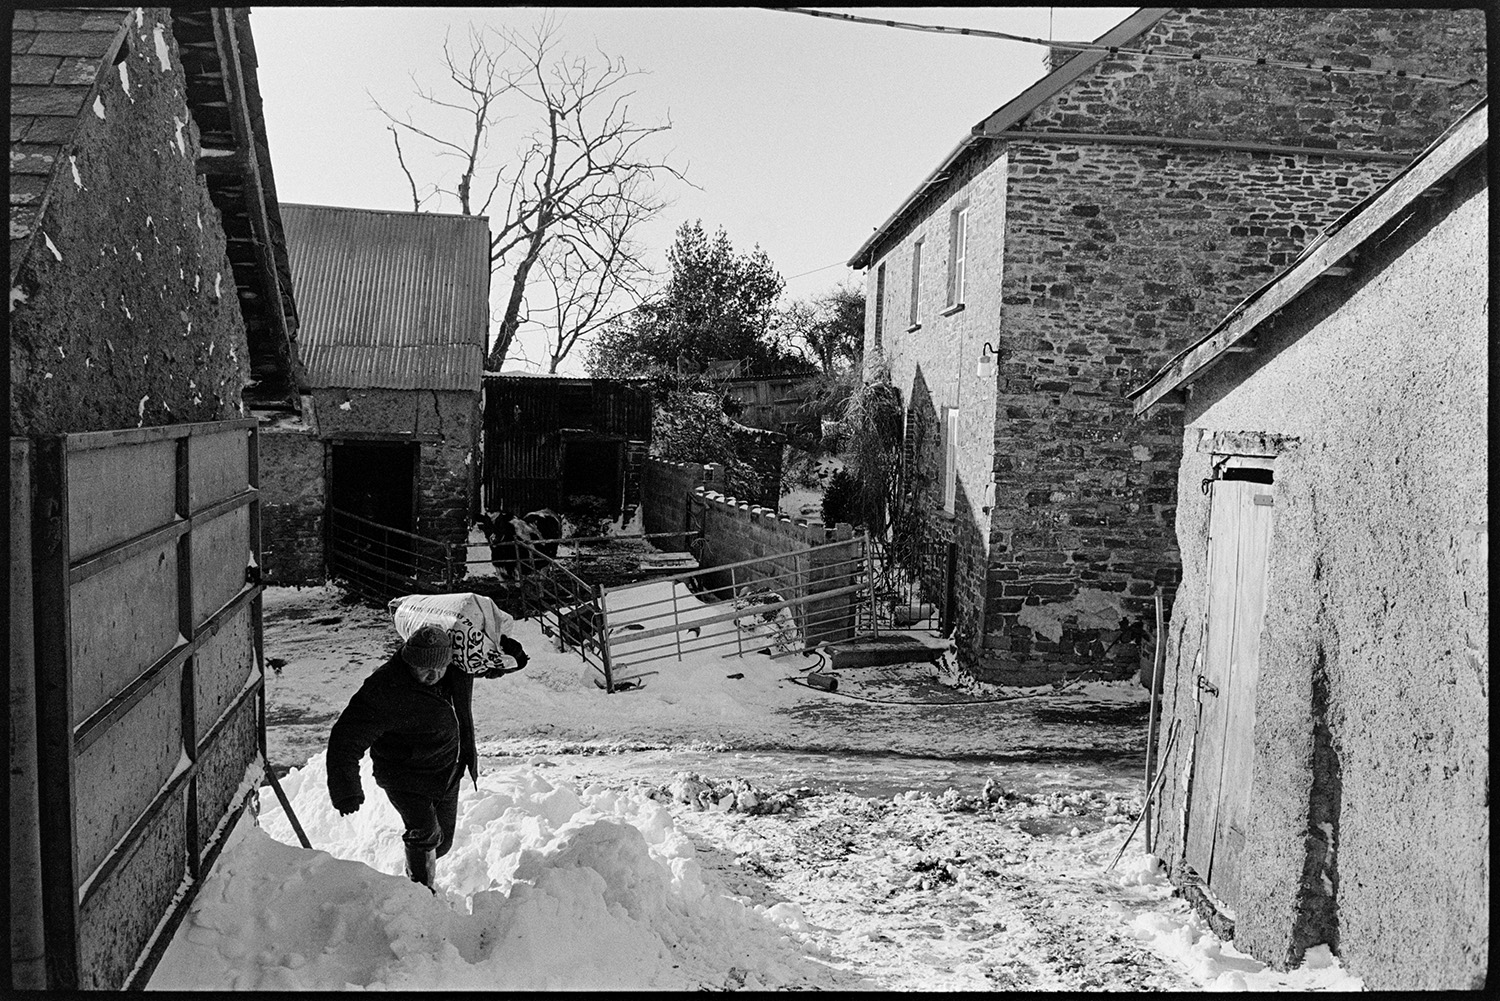 Snow, farmer carrying sacks of feed to cows in yard during snow, filling trough. 
[John Lock carrying a sack of feed through a snow covered farmyard at Cleave, Dolton to take to cattle. He is passing the farmhouse and barns.]